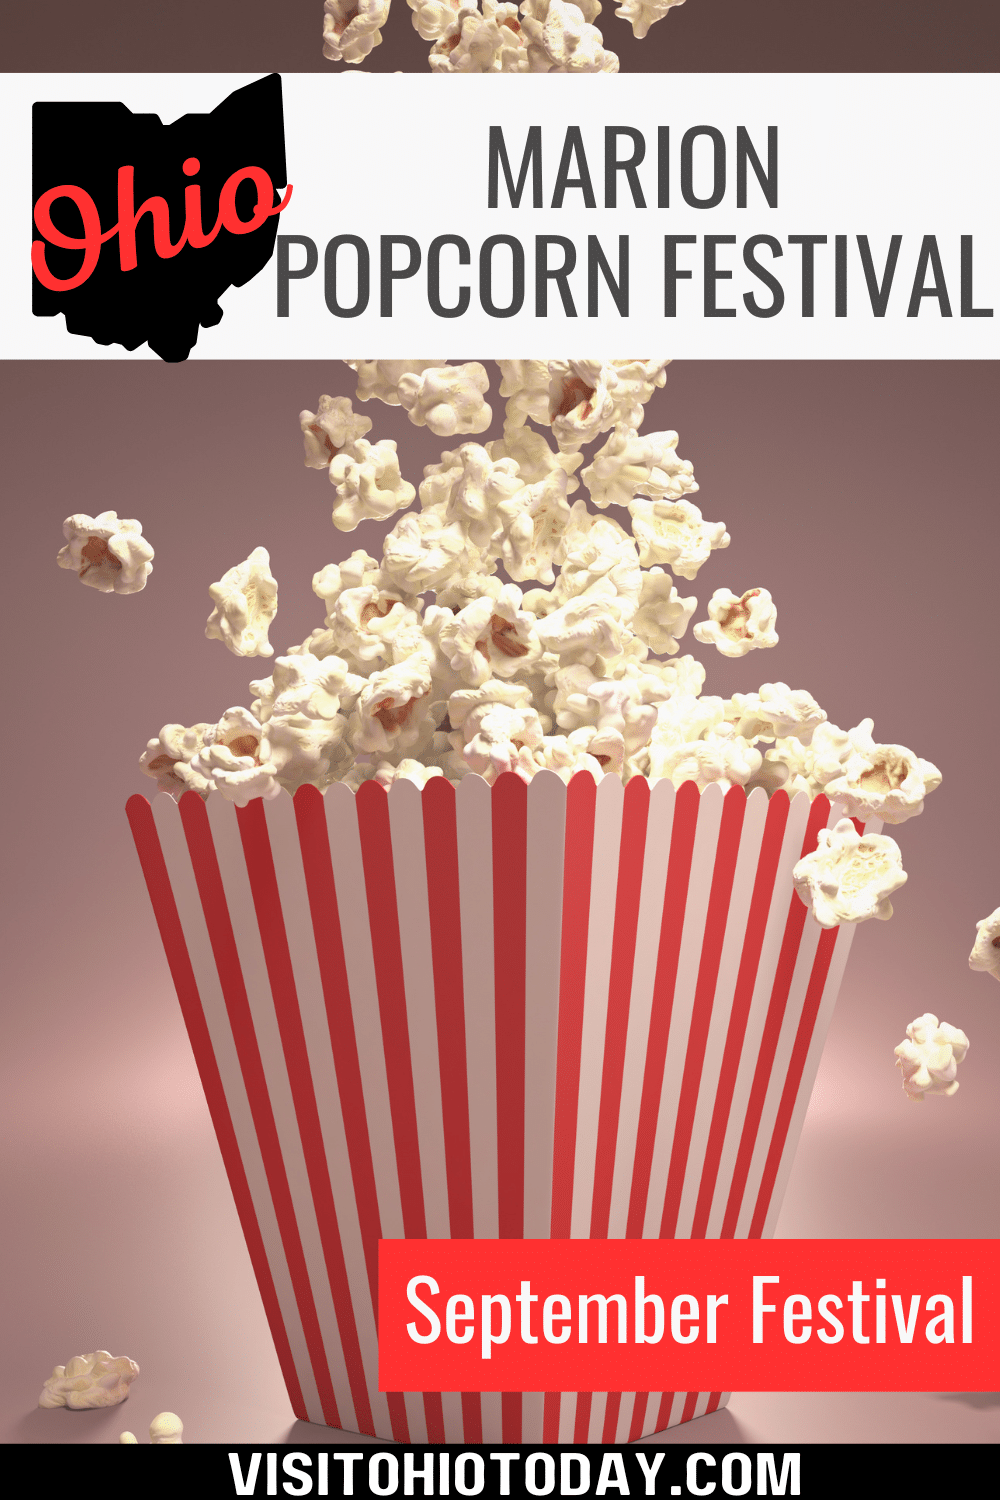 The Marion Popcorn Festival is the largest popcorn festival in the world, attracting more than 250,000 visitors. Open Thursday, Friday and Saturday, 7th, 8th, and 9th September 2023.